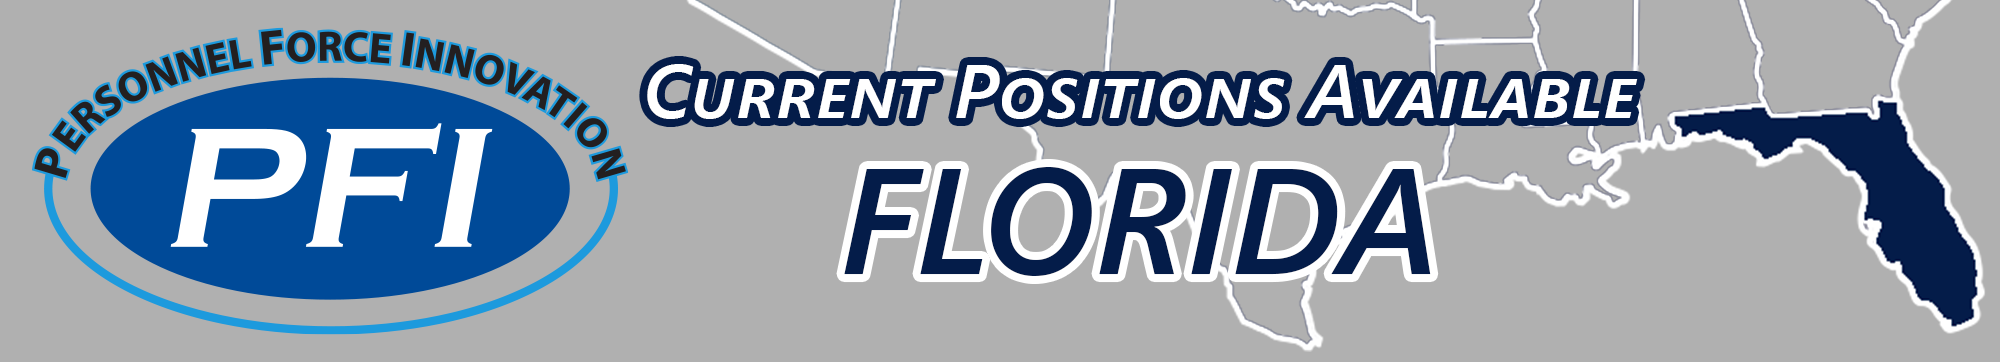 Decorative banner that says Personnel Force Innovation (PFI) current positions available Florida